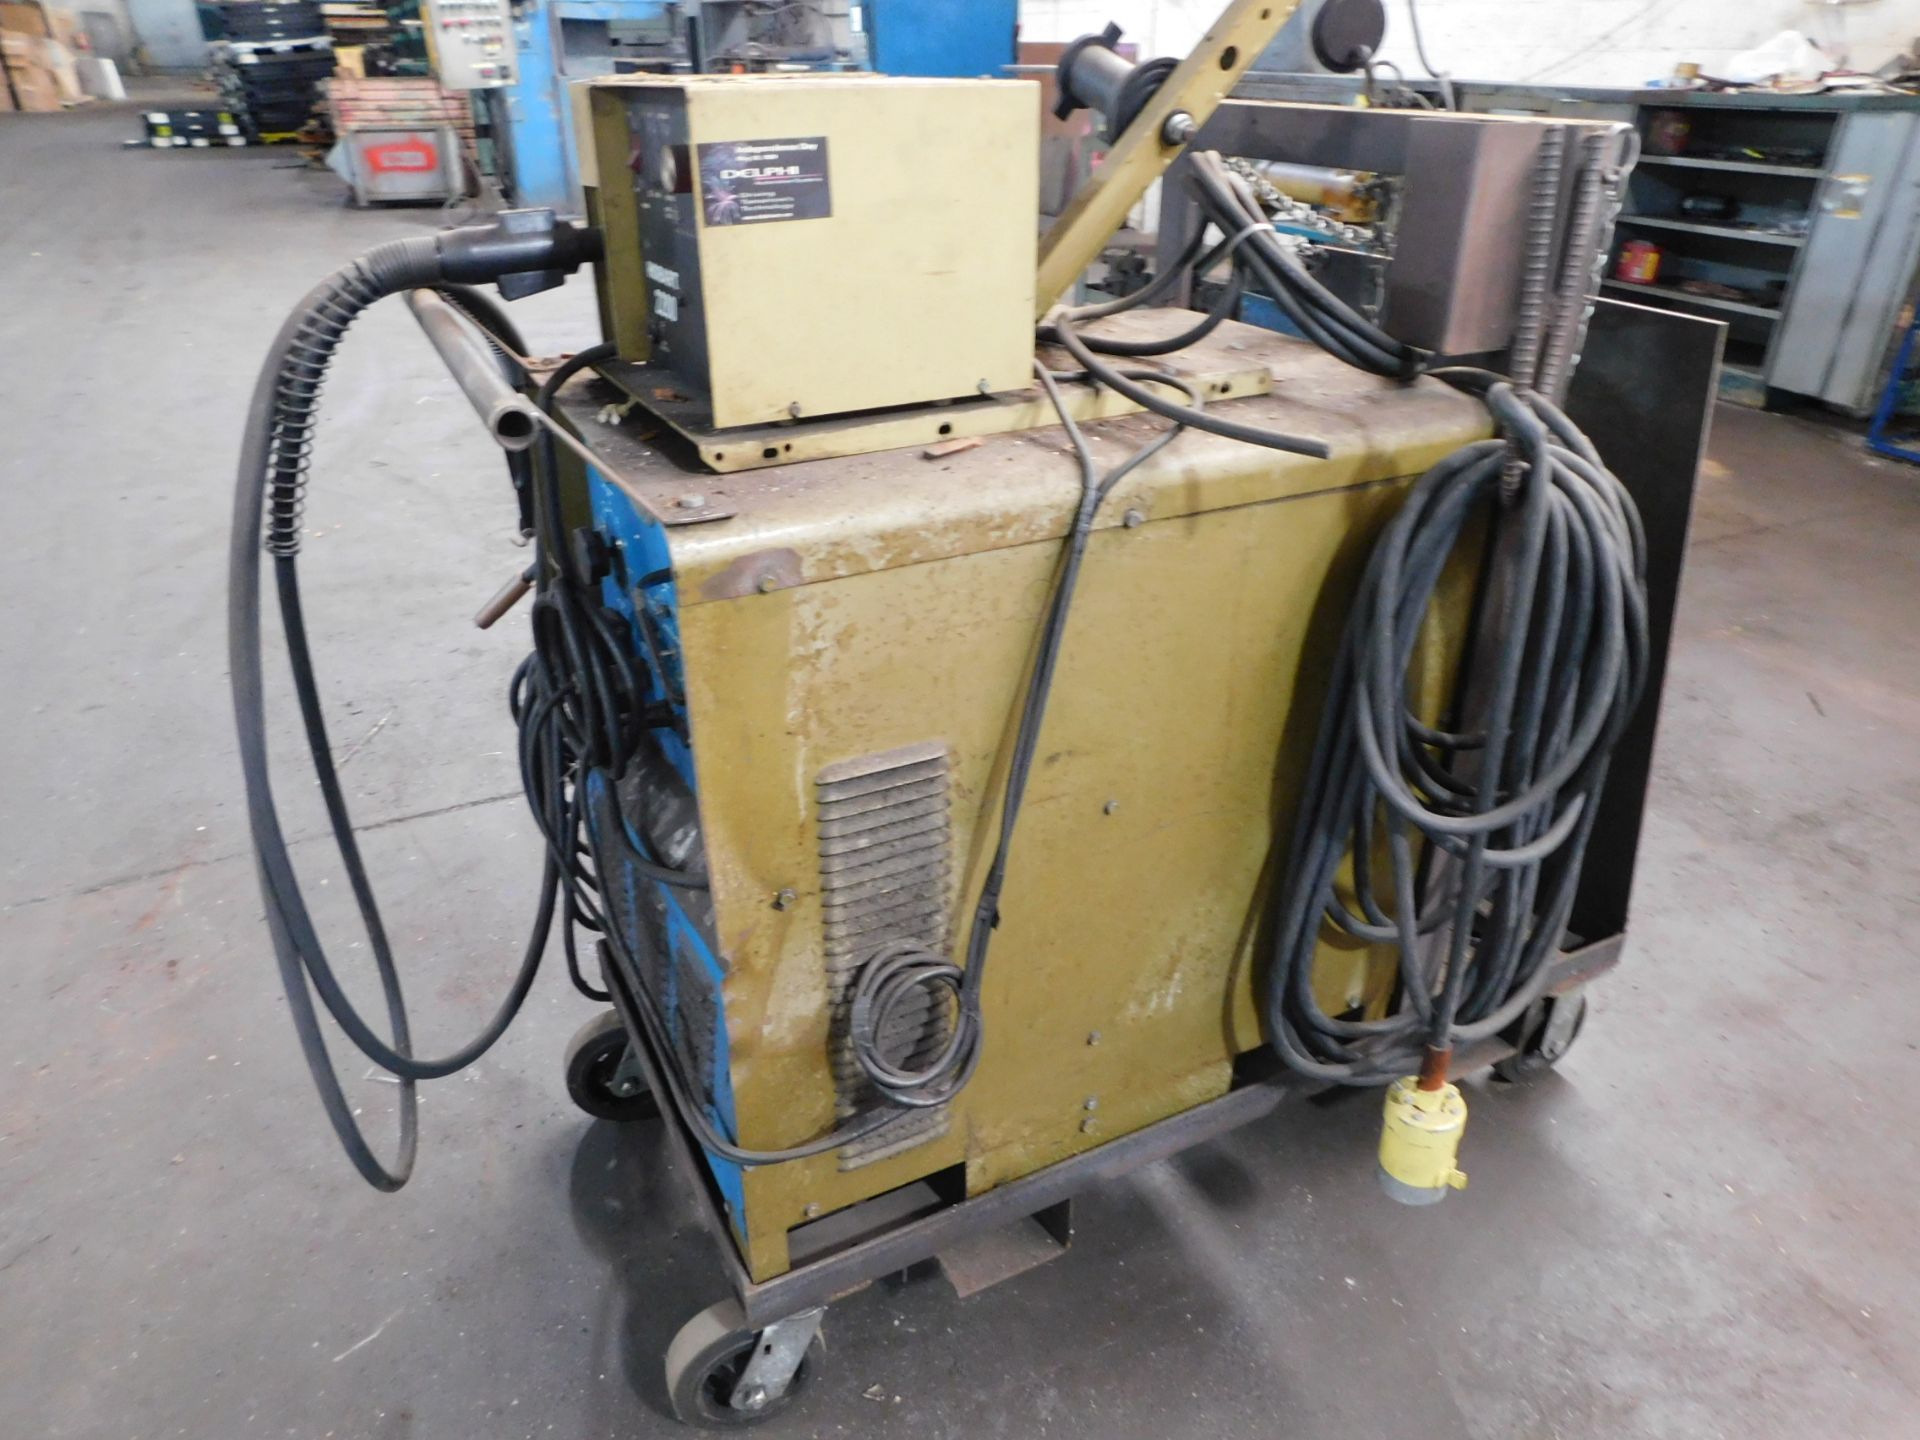 Hobart Model RC-300 Mig Welder, s/n 12RT-69459, with Hobart 2200 Wire Feeder and Mig Gun - Image 3 of 6